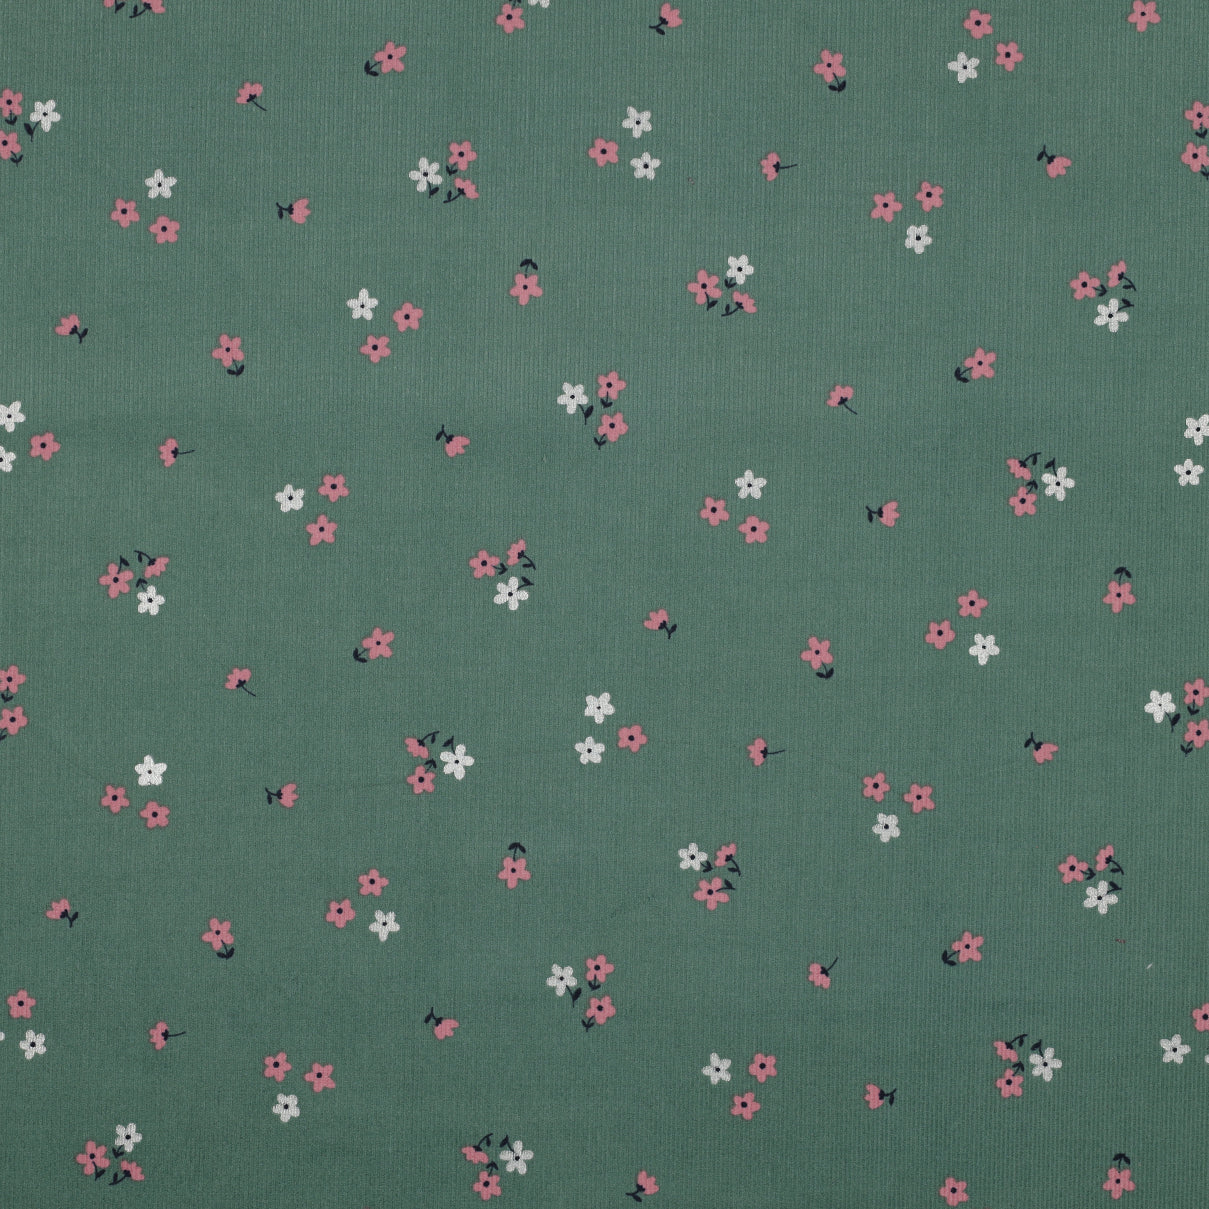 Small Flowers on Green Cotton Needlecord